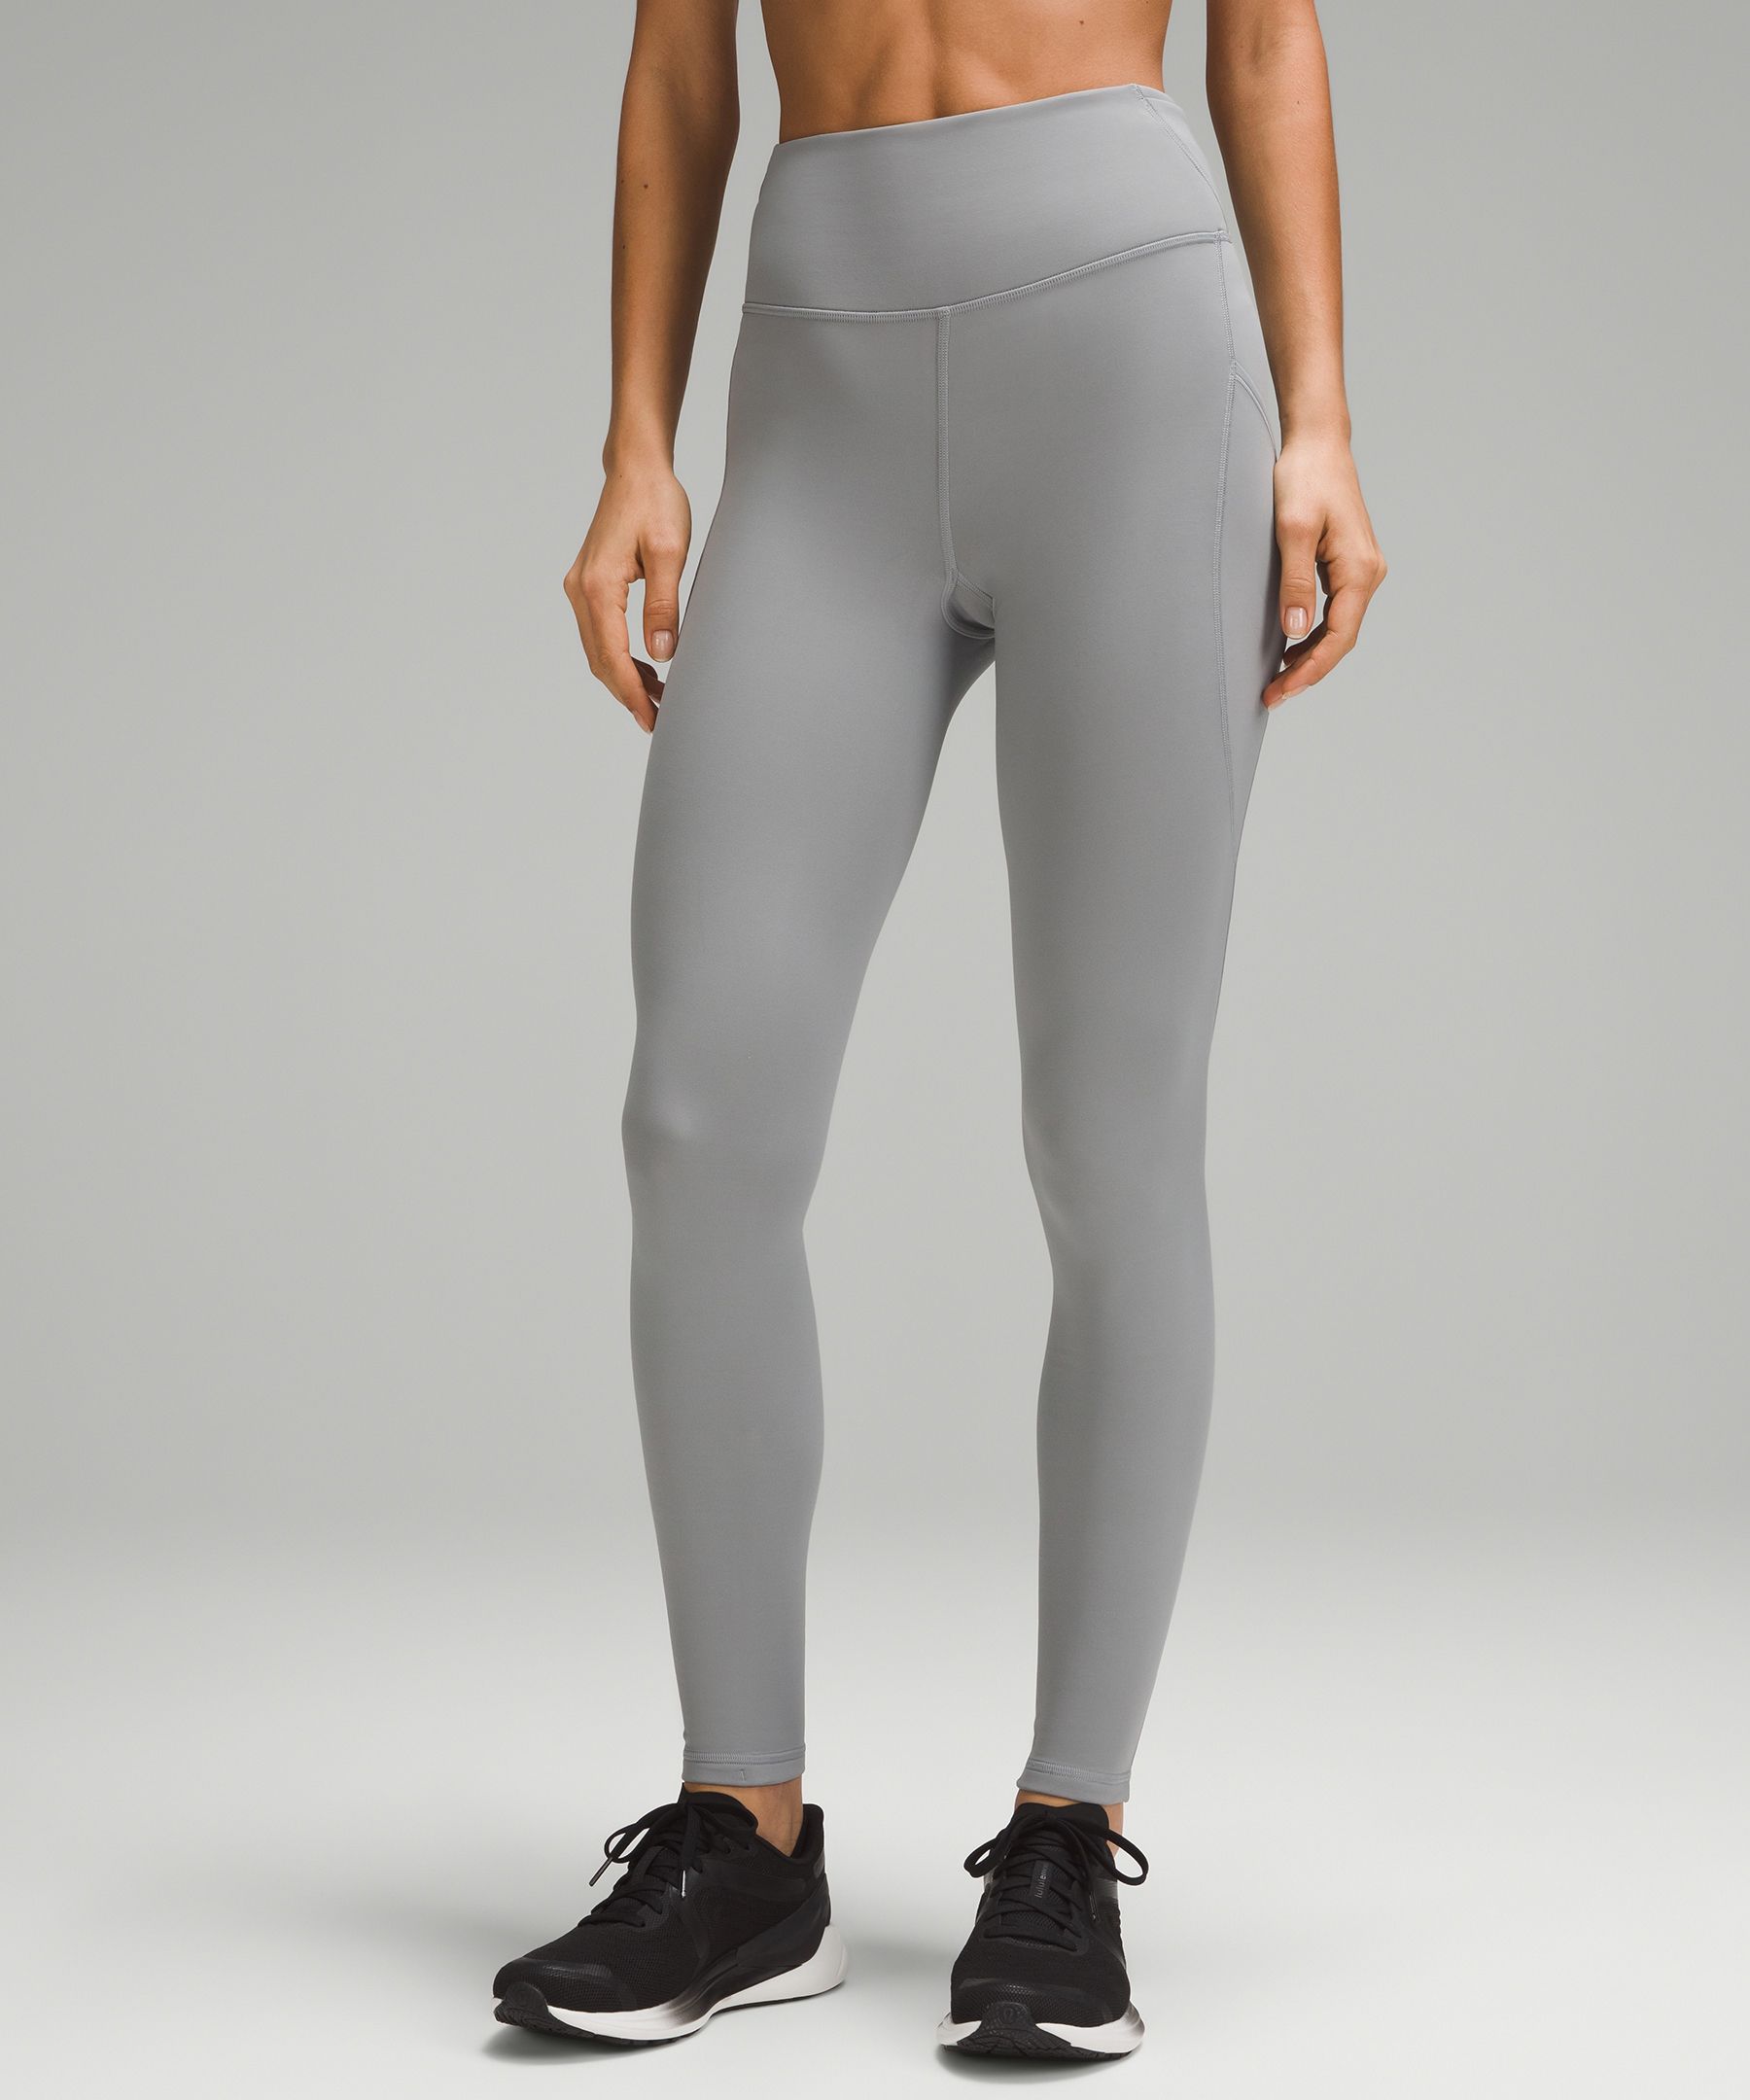 Lululemon athletica Fast and Free High-Rise Tight 28, Women's Leggings/ Tights